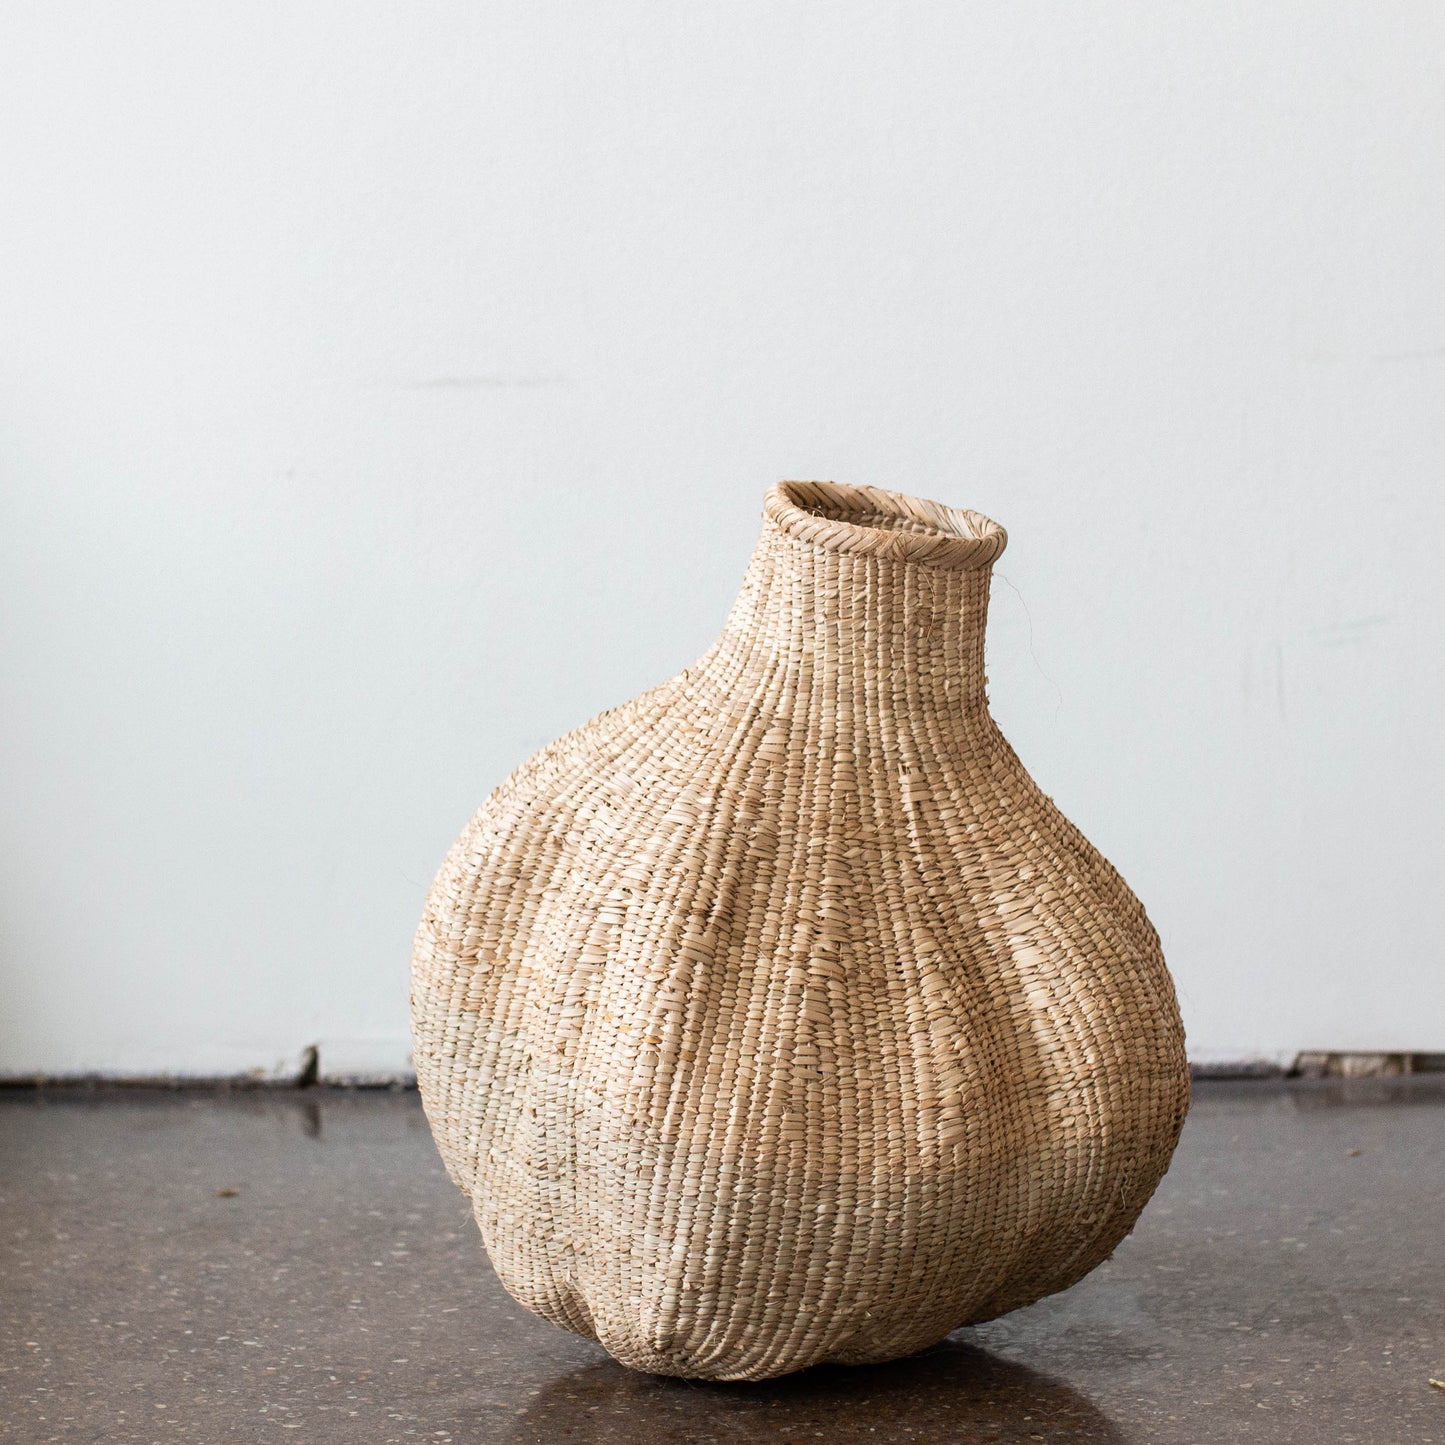 extra small gourd shaped basket from kanju interiors Africa 